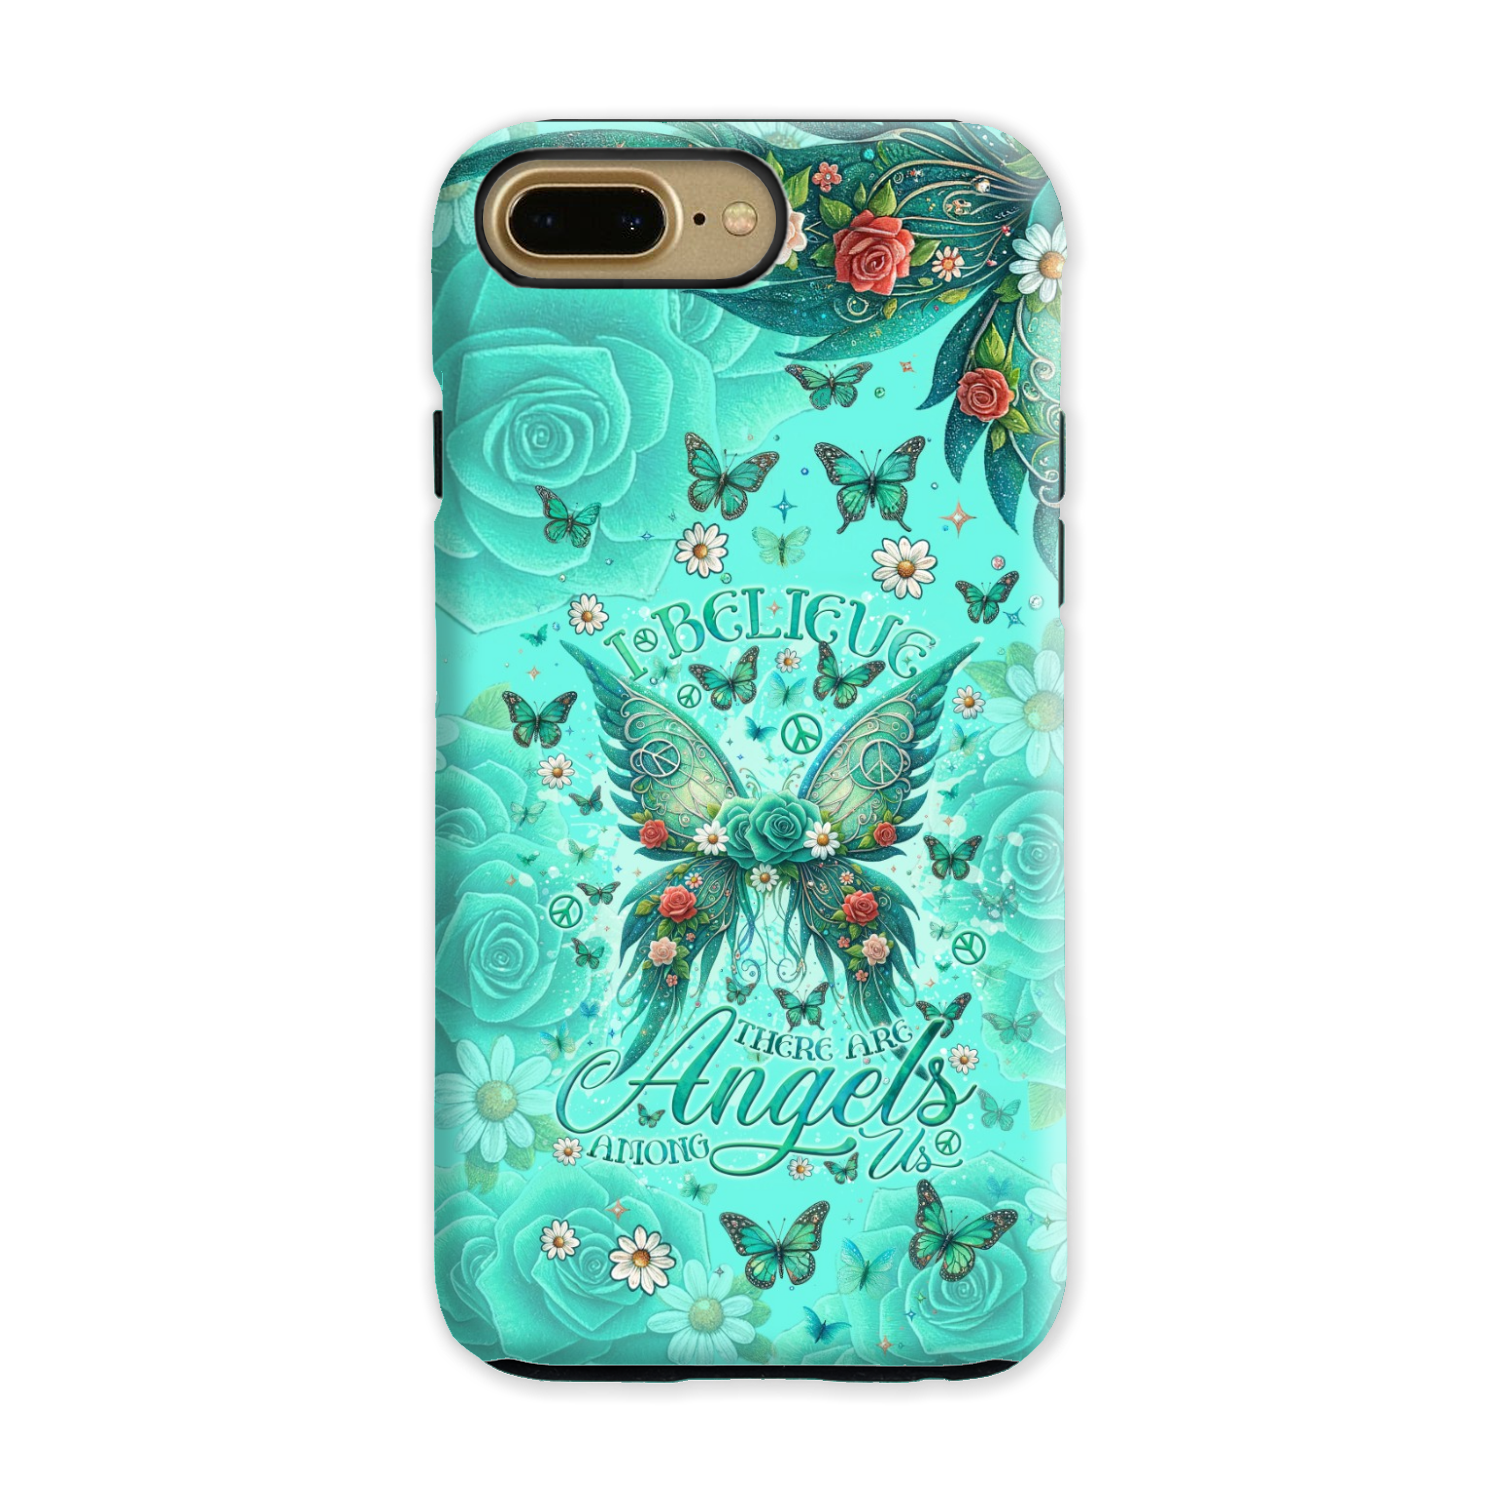 I BELIEVE THERE ARE ANGELS AMONG US WINGS PHONE CASE - TLNO2803242